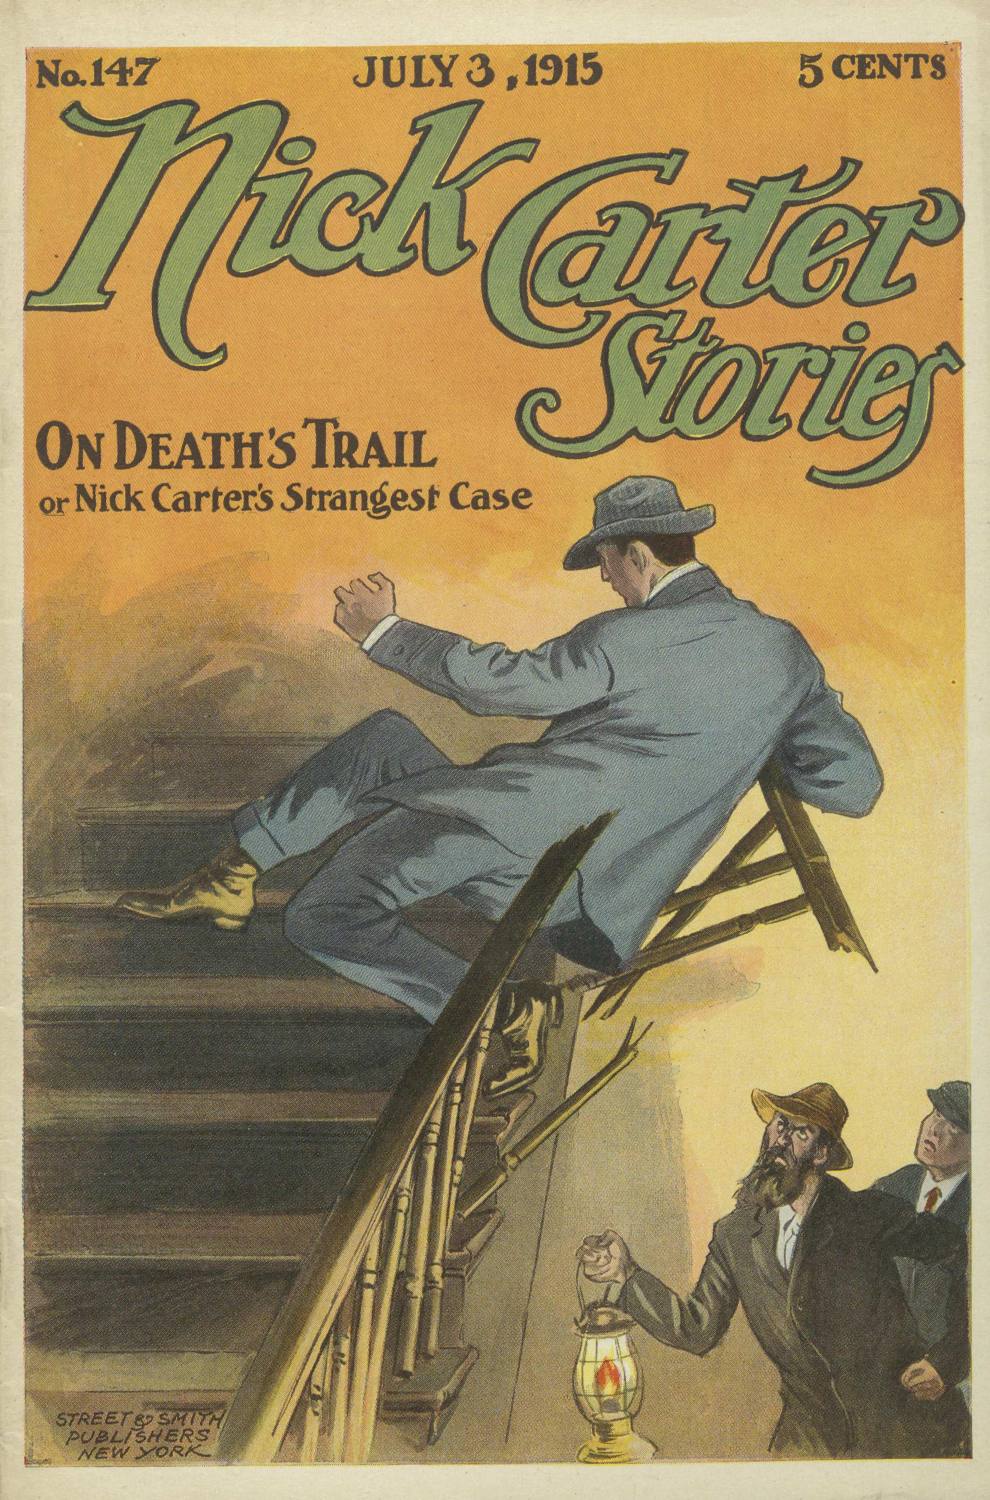 The Project Gutenberg eBook of On Deaths Trail. Adult Picture